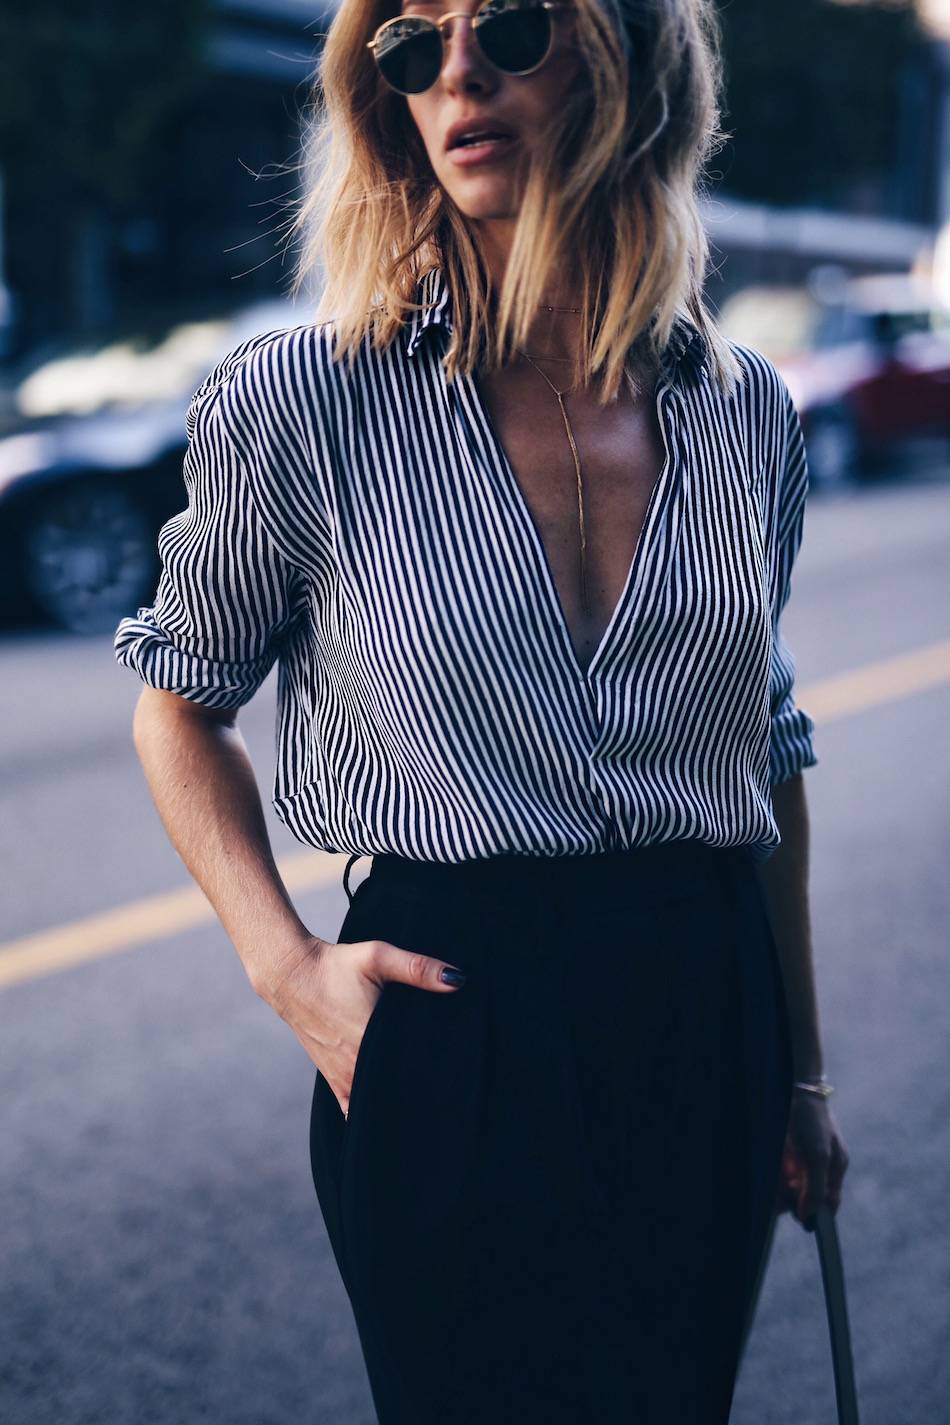 personal style, striped shirt, lariat necklace